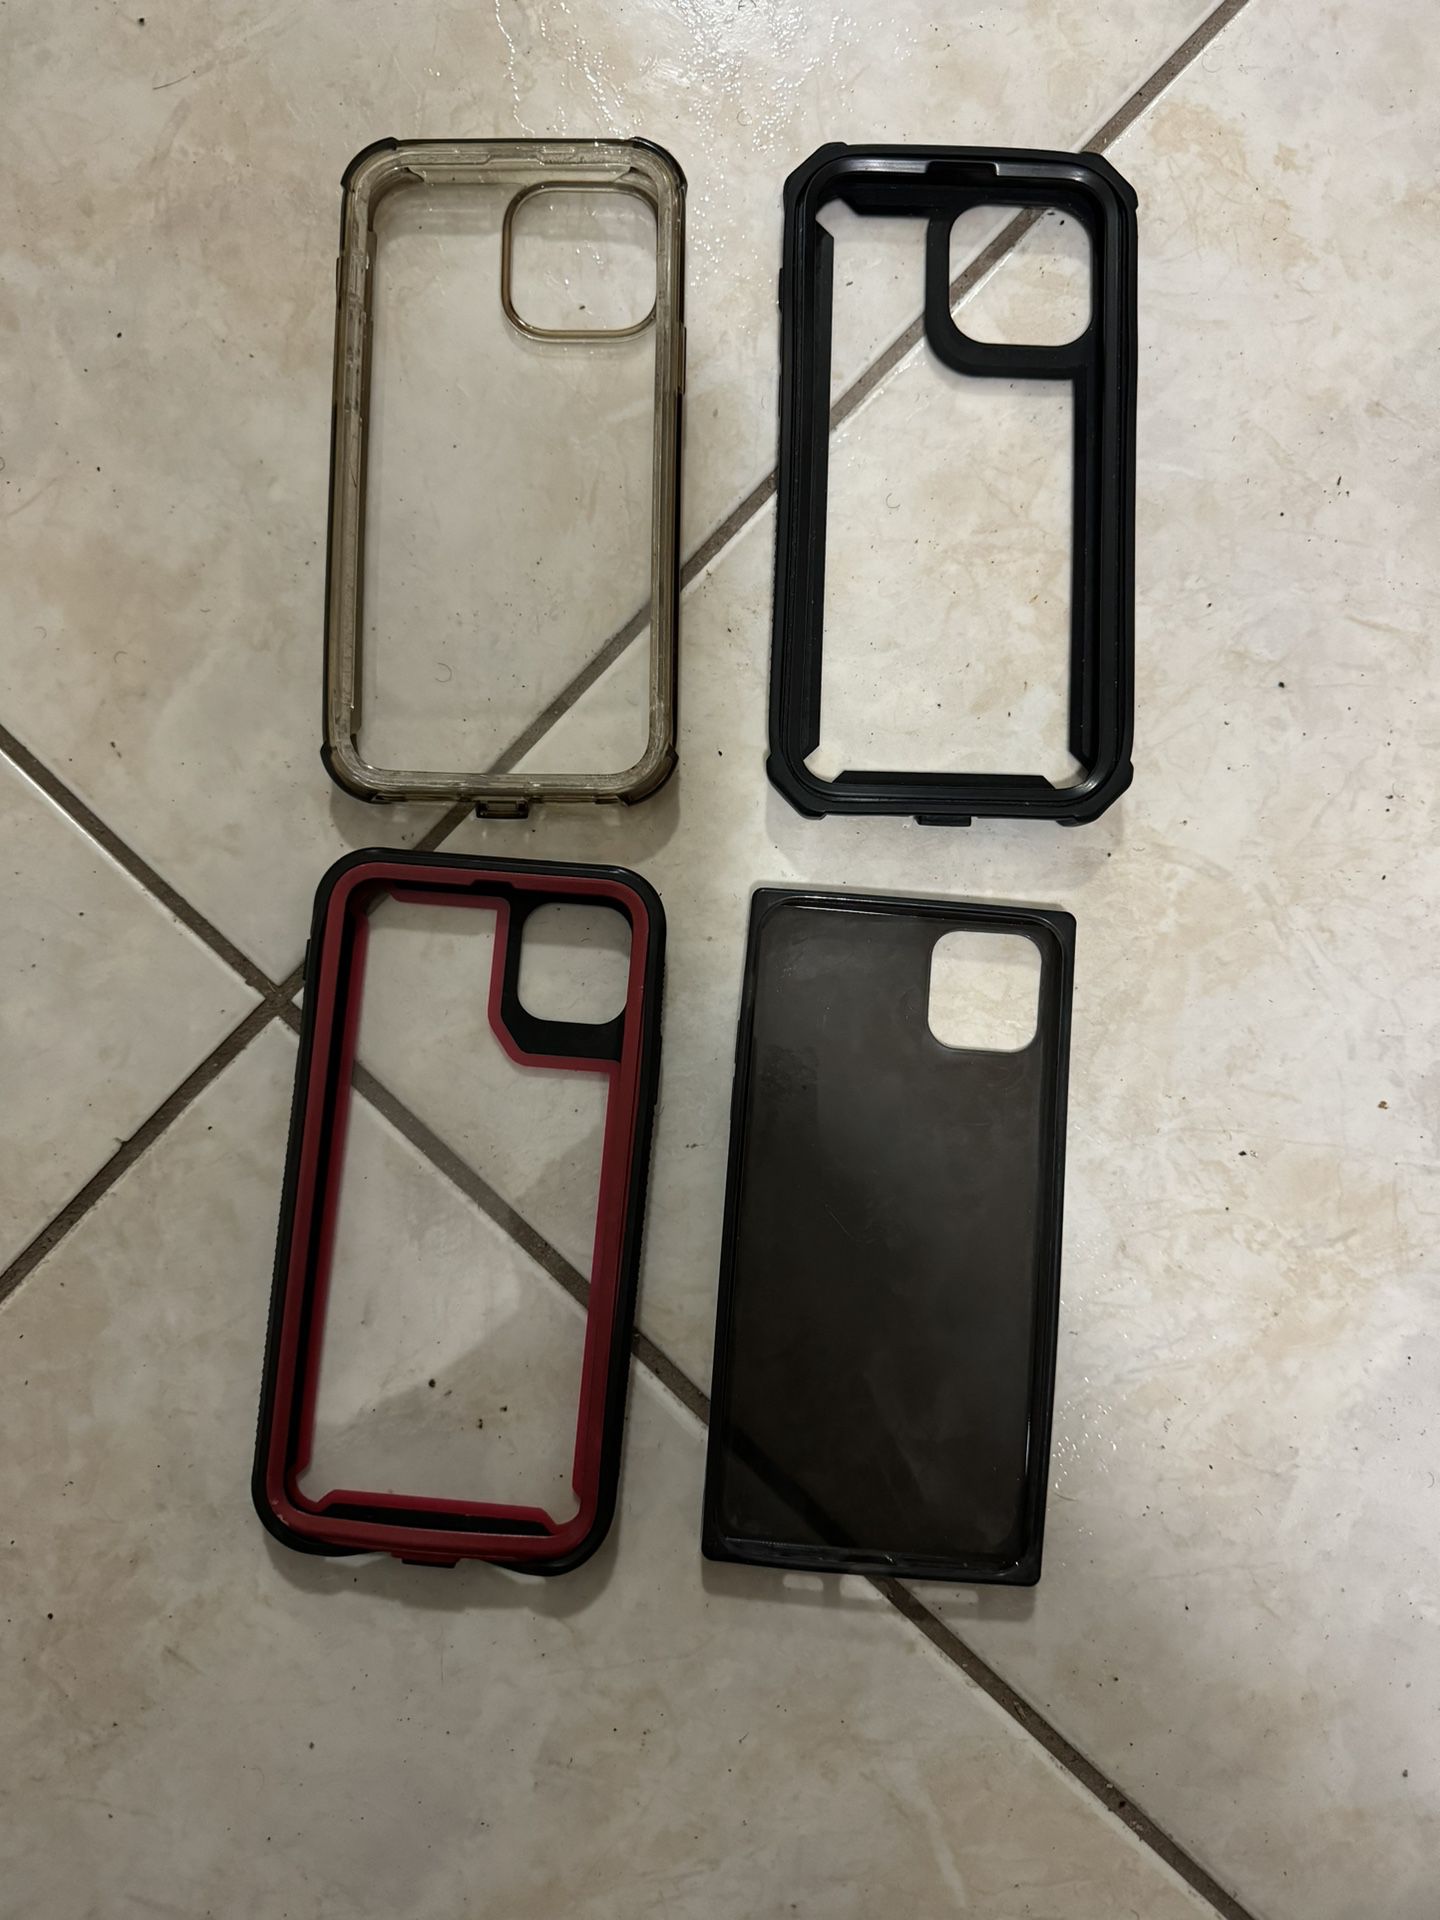 iPhone 13 Pro Max Cases $15 For All 4 Or $5 Each